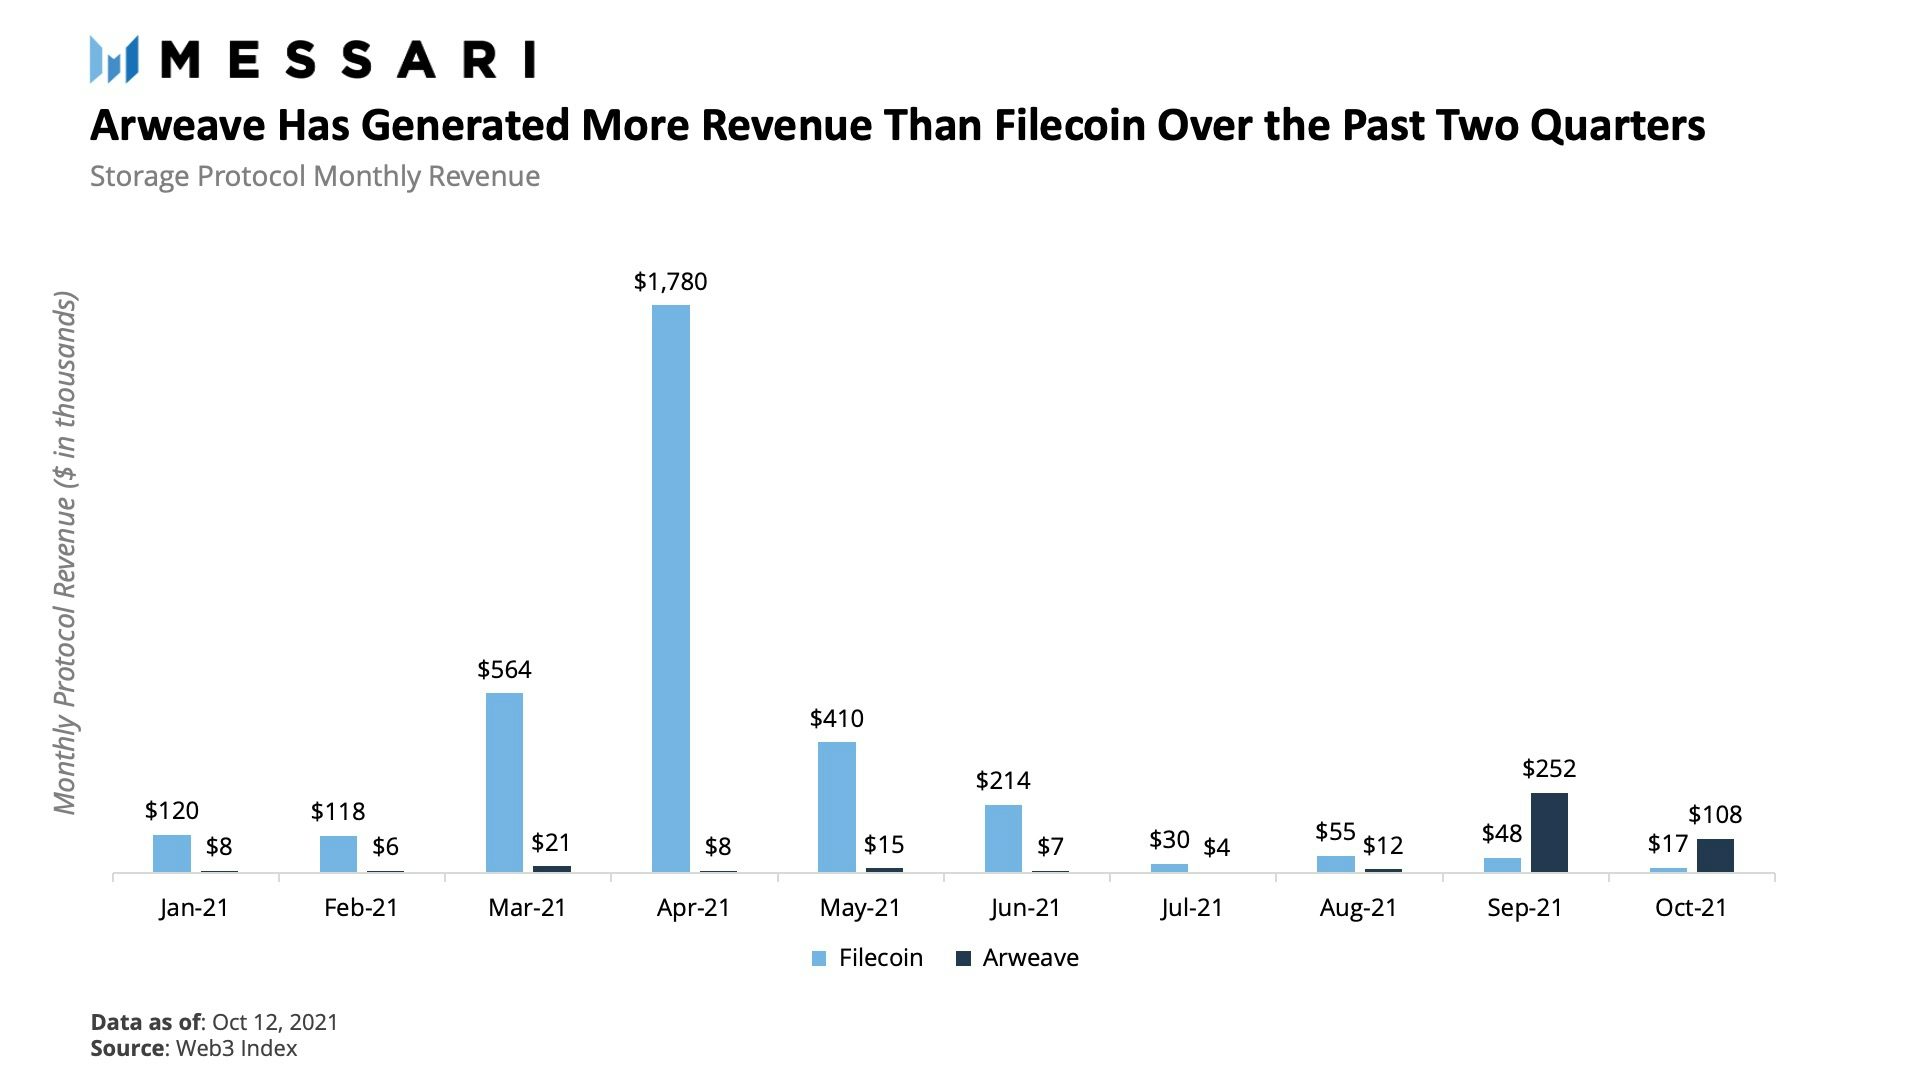 While Filecoin has generated more total revenue, Arweave produced more revenue than Filecoin over the past two quarters (data as of October 12th, 2021).